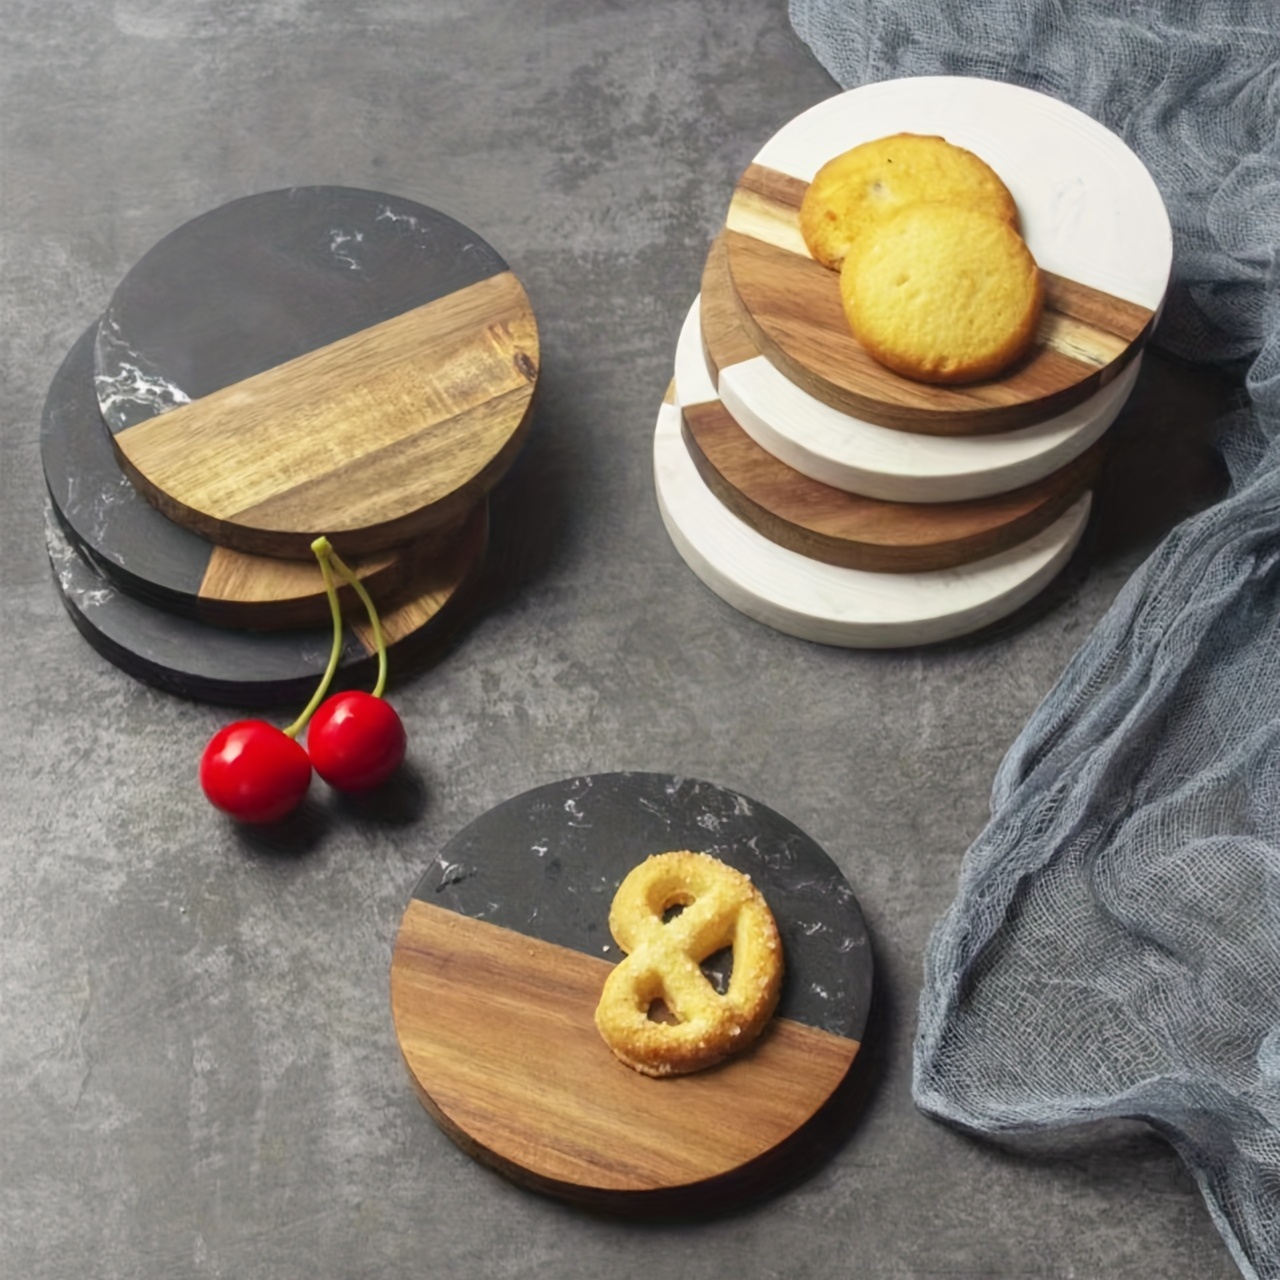 Custom Engraved Wooden Coasters for Drinks, Wooden Drink Coasters  Set,suitable for Most Kinds of Cups,tabletop Protection for Any Table Type  